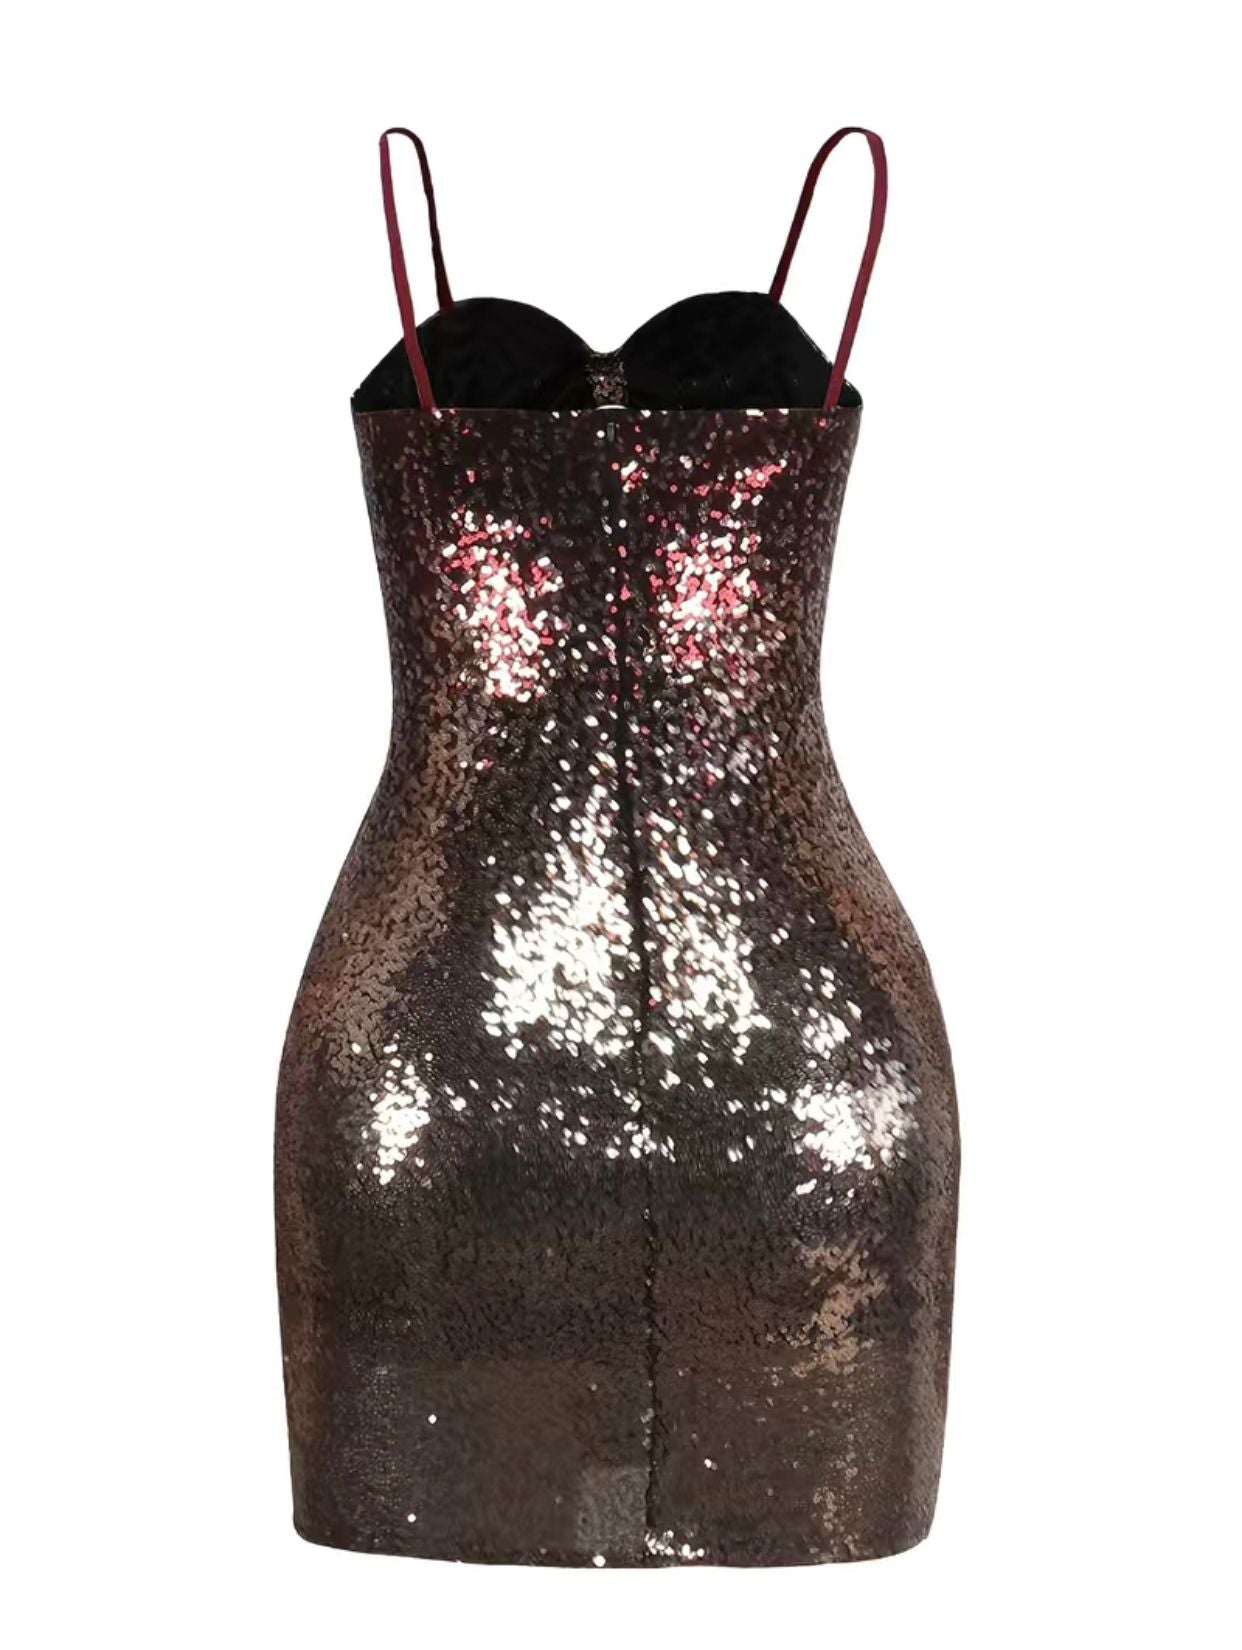 The Sweetheart Sequined Spaghetti Strap Bodycon Dress in Wine/RoseGold